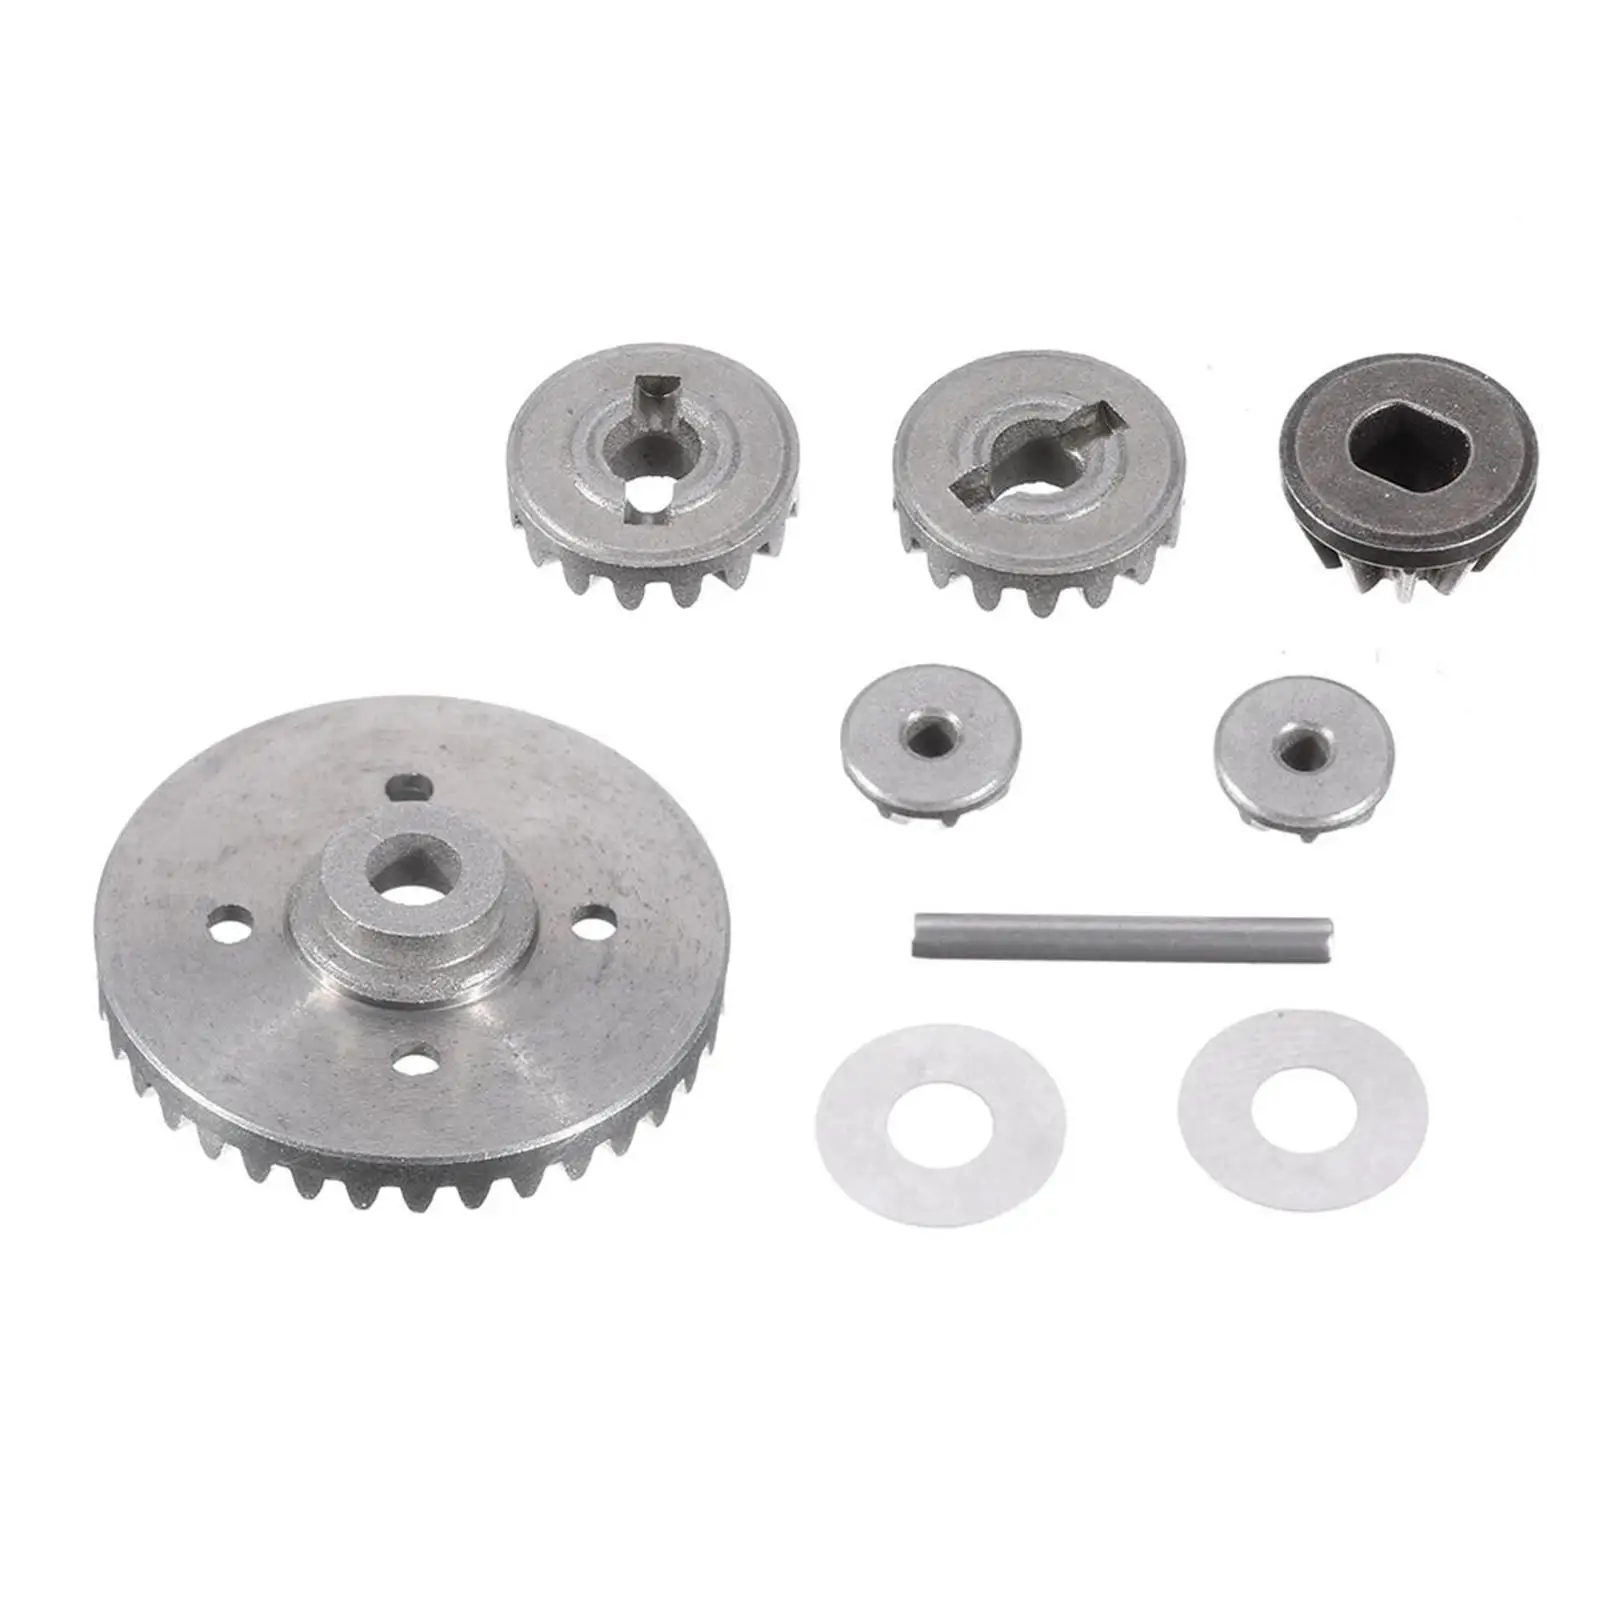 Metal Rc Differential Gear Spare Parts Accessories For Hbx 16889 16889a 1/16  - Parts & Accs - AliExpress